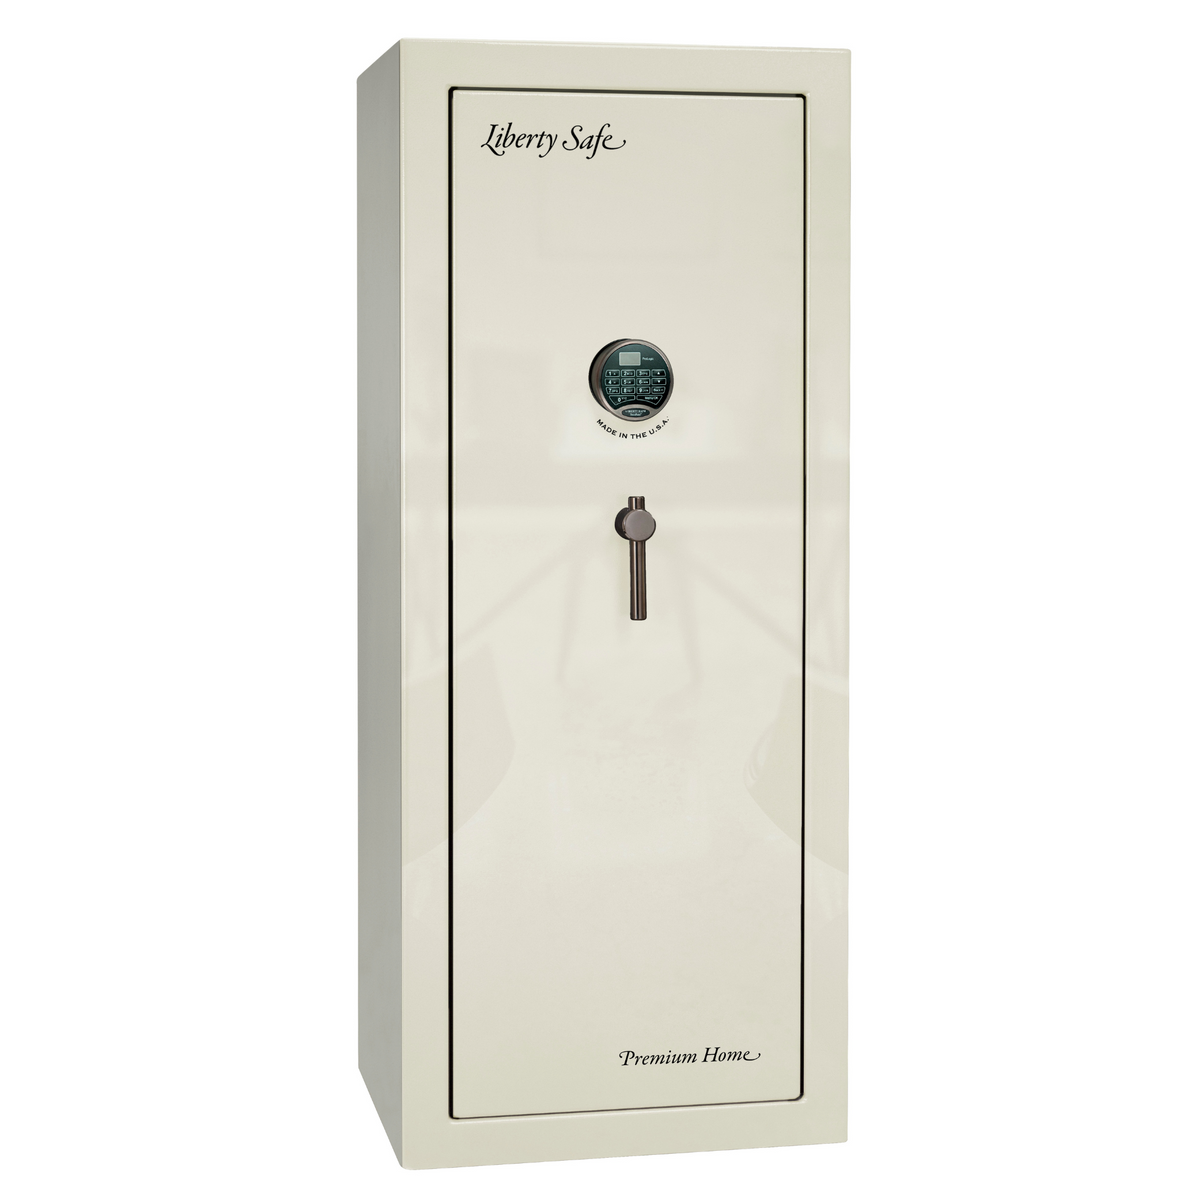 Premium Home Series | Level 7 Security | 2 Hour Fire Protection | 17 | Dimensions: 59.25&quot;(H) x 24&quot;(W) x 20.25&quot;(D) | White Gloss - Closed Door